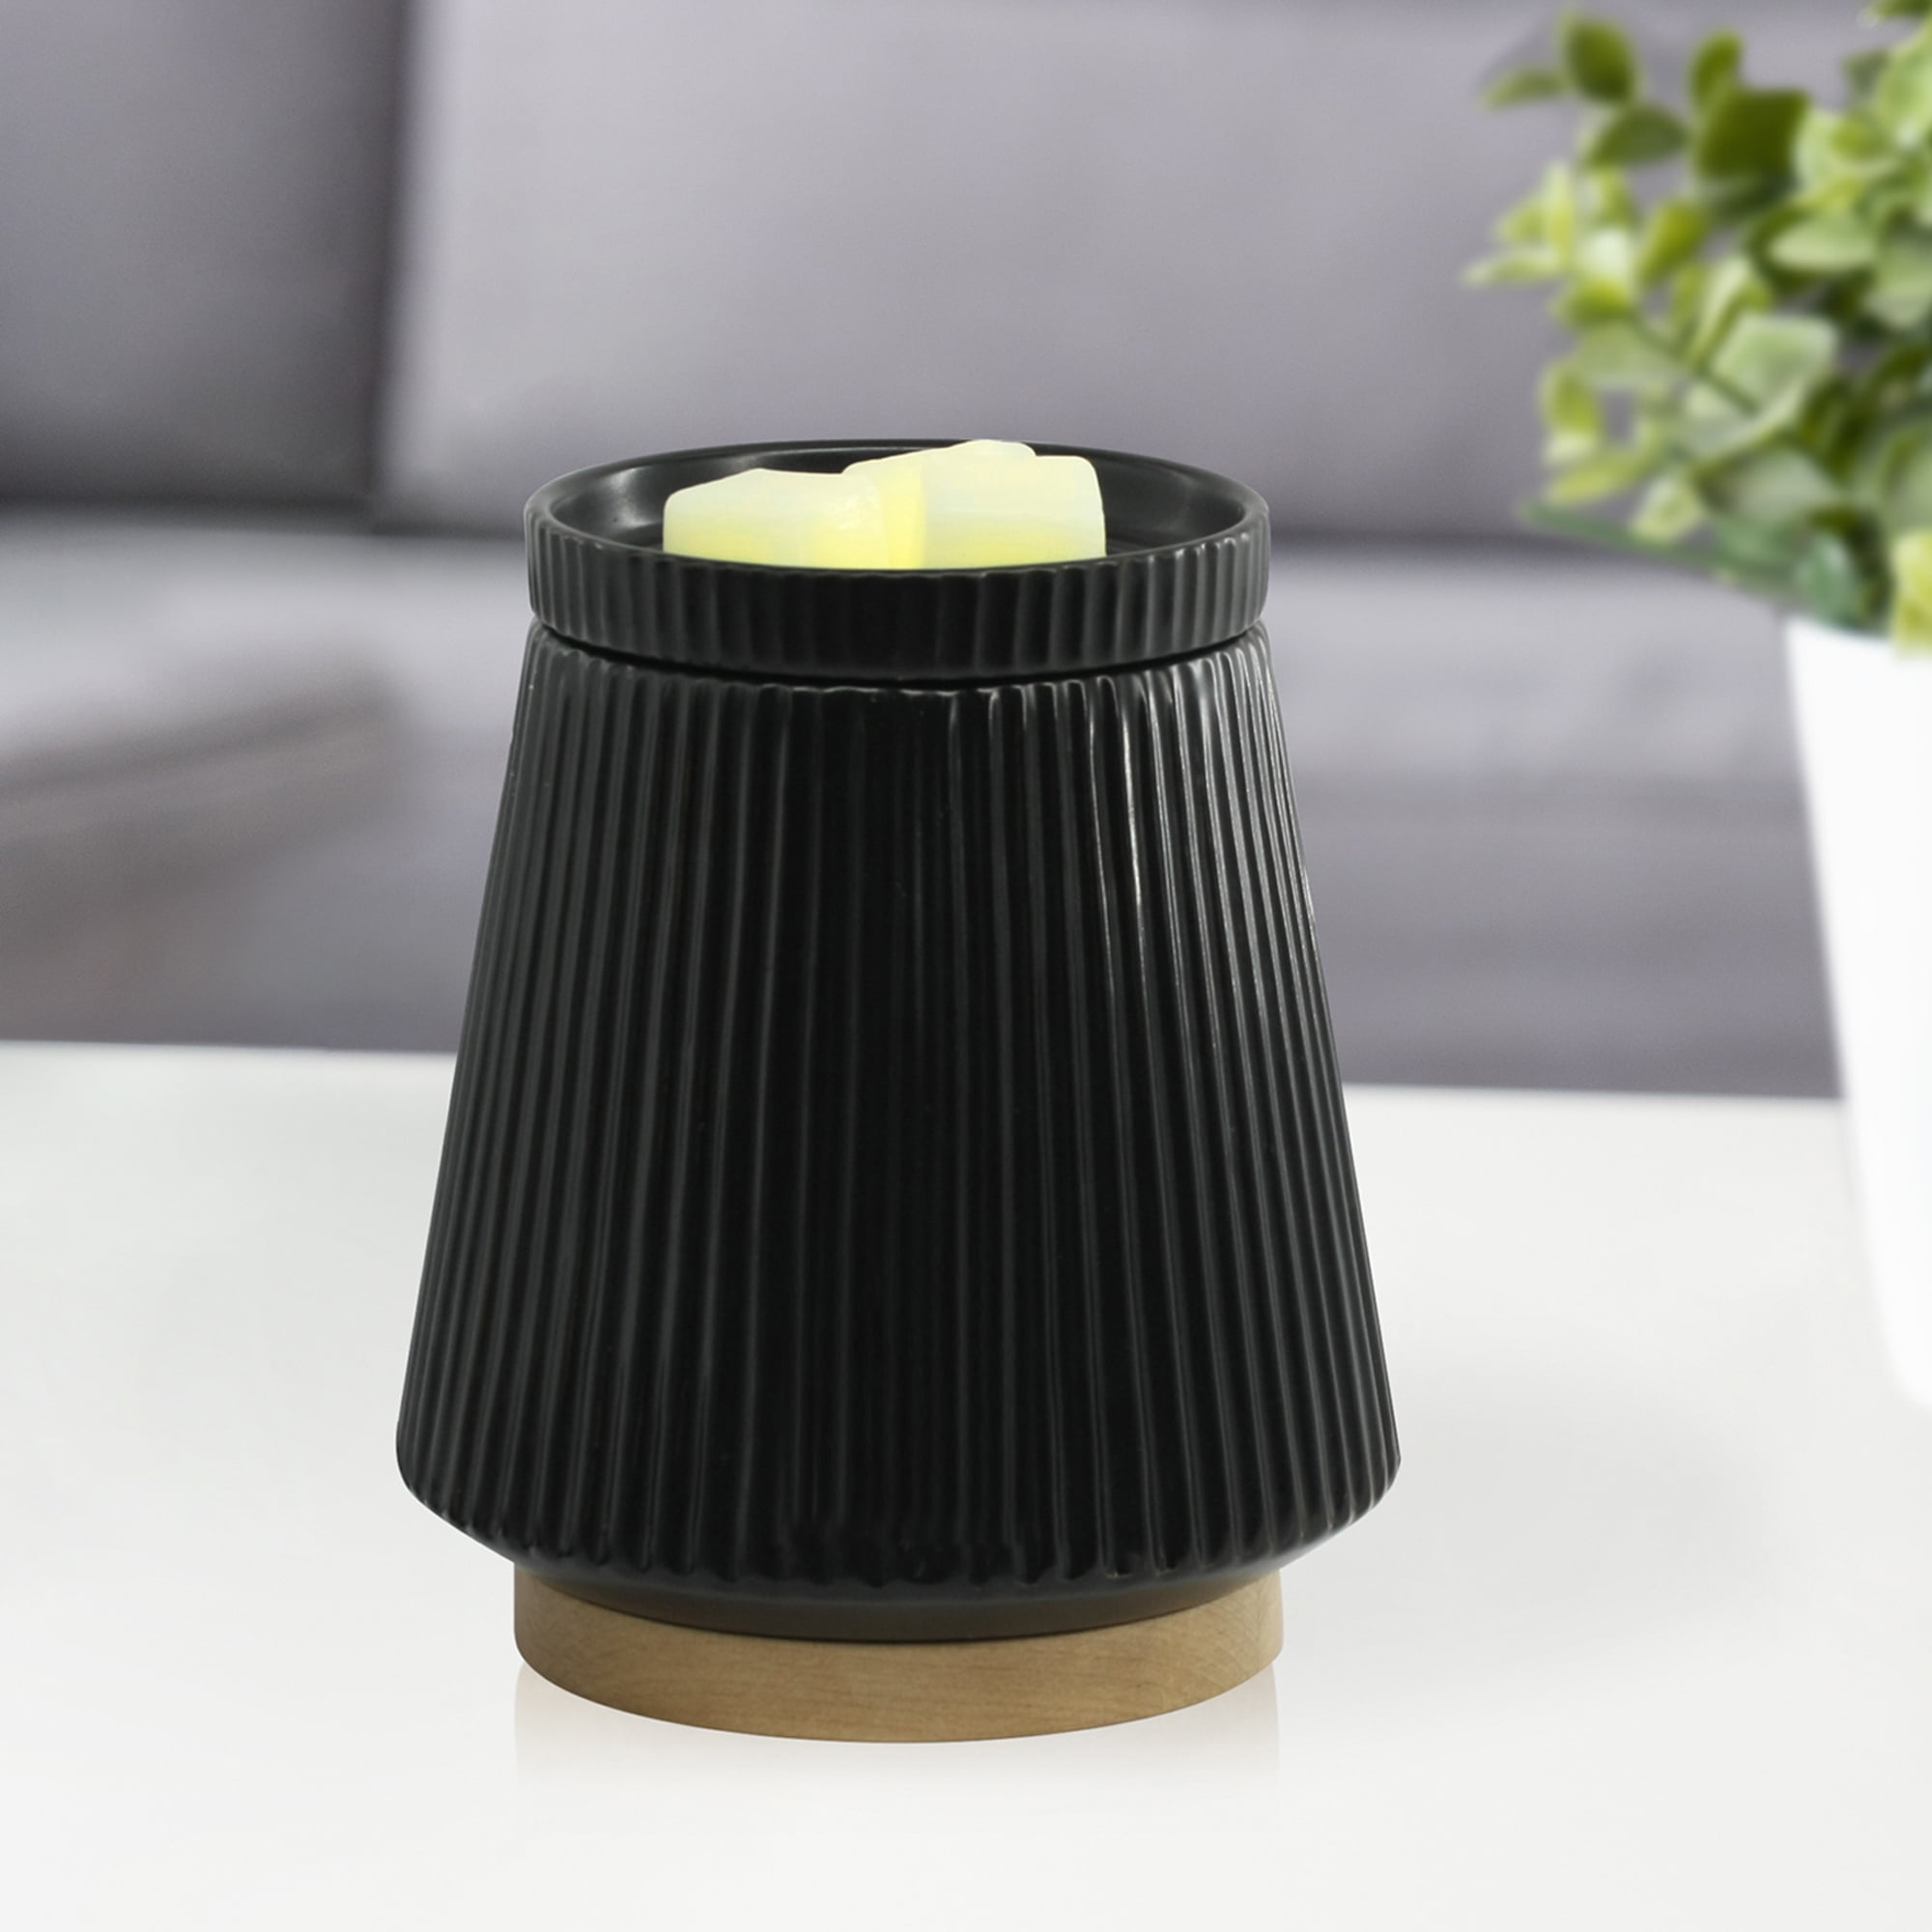 Better Homes & Gardens Electric Black Ribbed Ceramic Wax Warmer with Wood Base, Single Pack